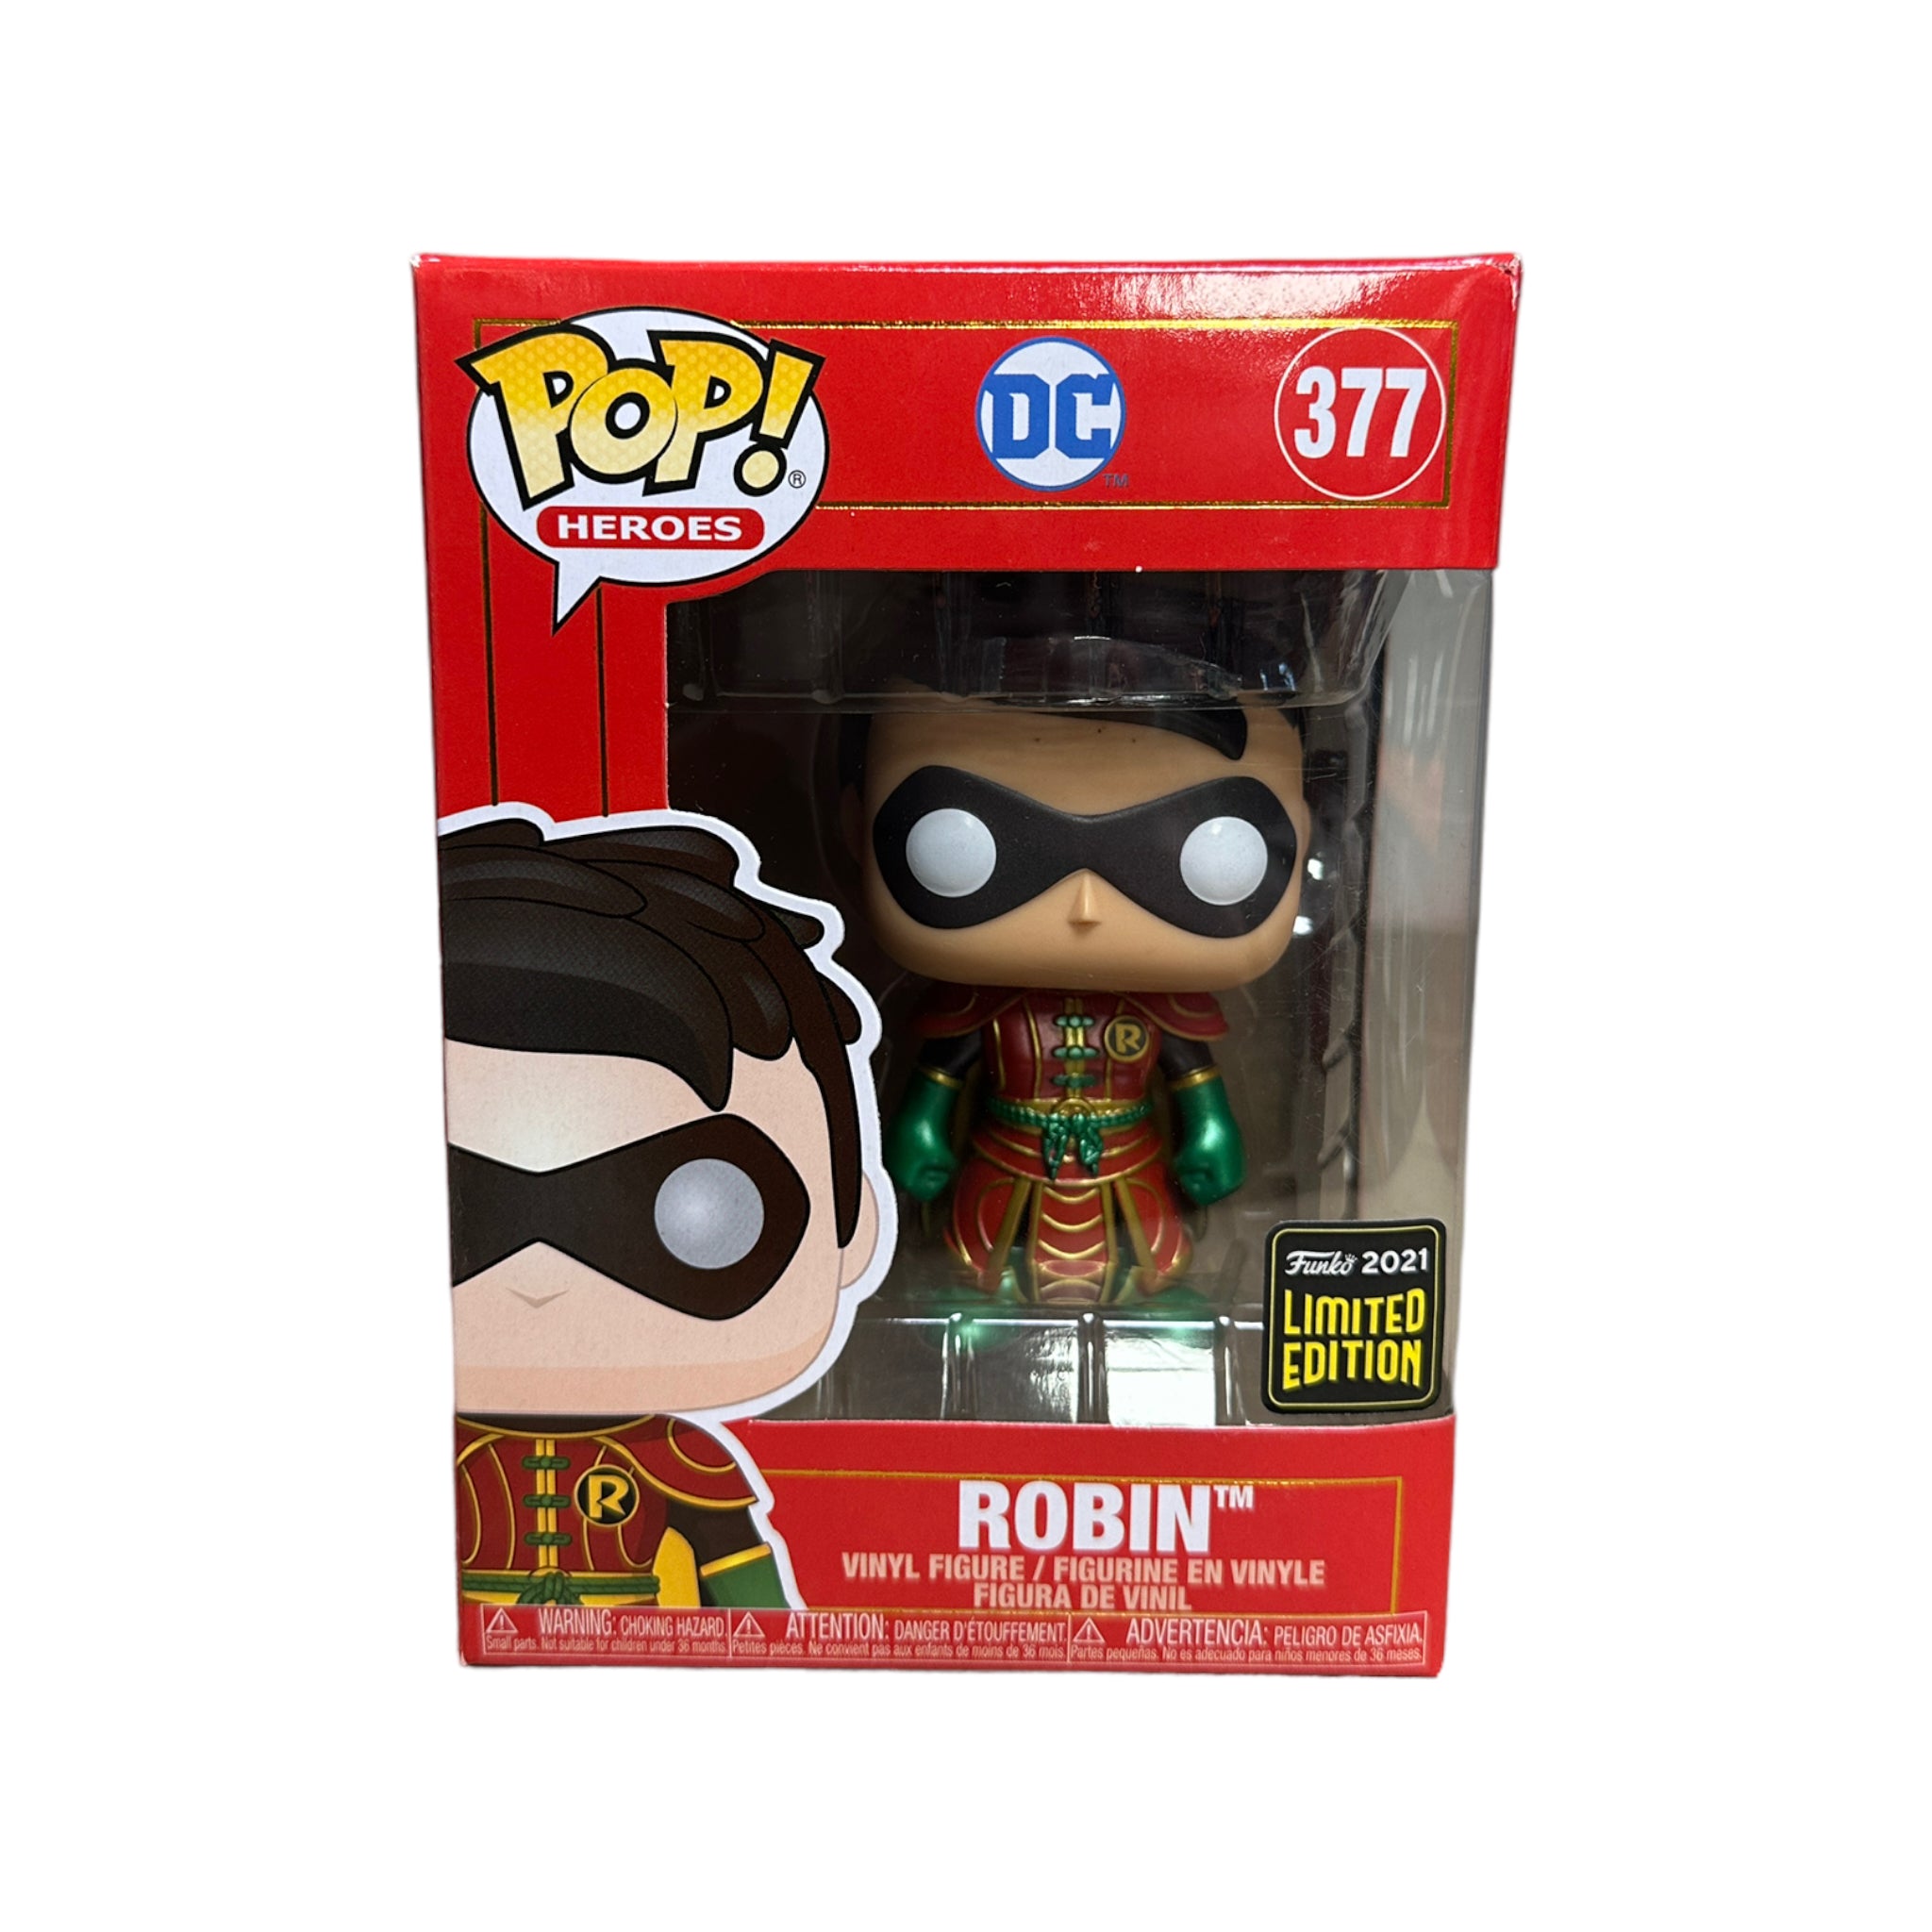 Robin #377 (Metallic) Funko Pop! - DC Imperial Palace - Asia 2021 Exclusive - Condition 7.5/10